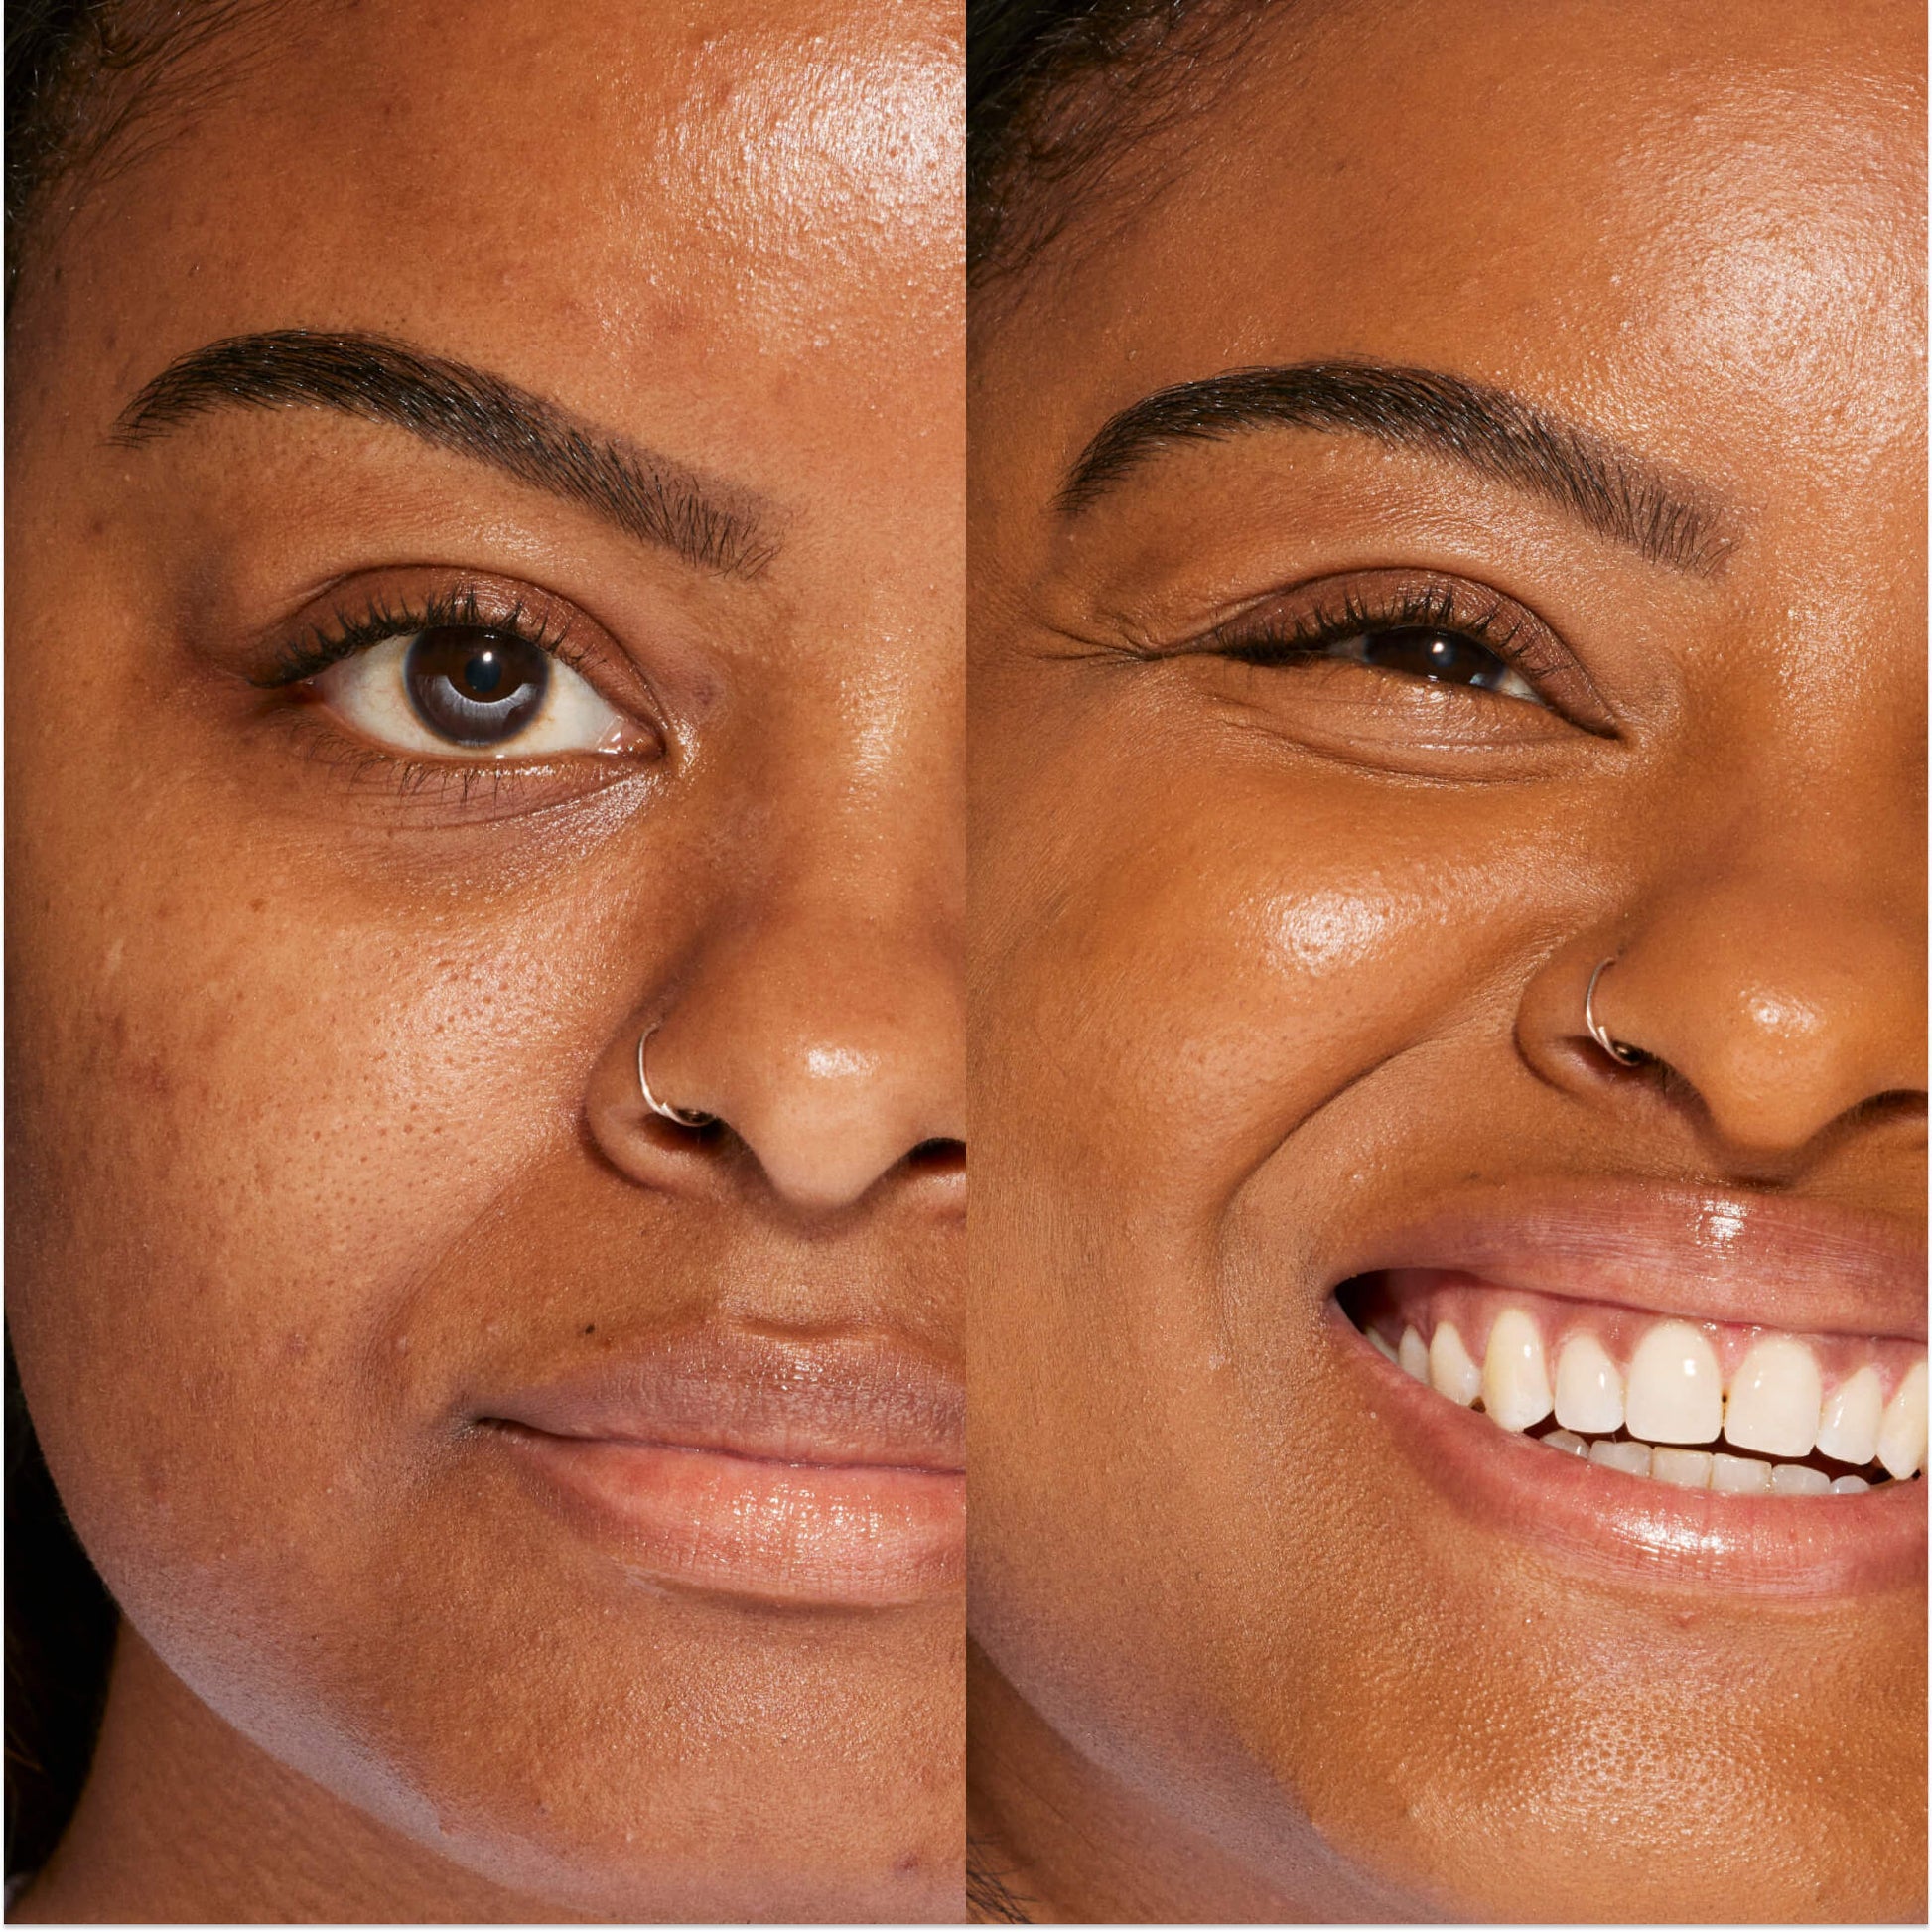 A person's face before and after using Tower 28 Beauty's Swipe Serum Concealer in shade 15.0 SAMO to cover up dark circles, blemishes, and discoloration